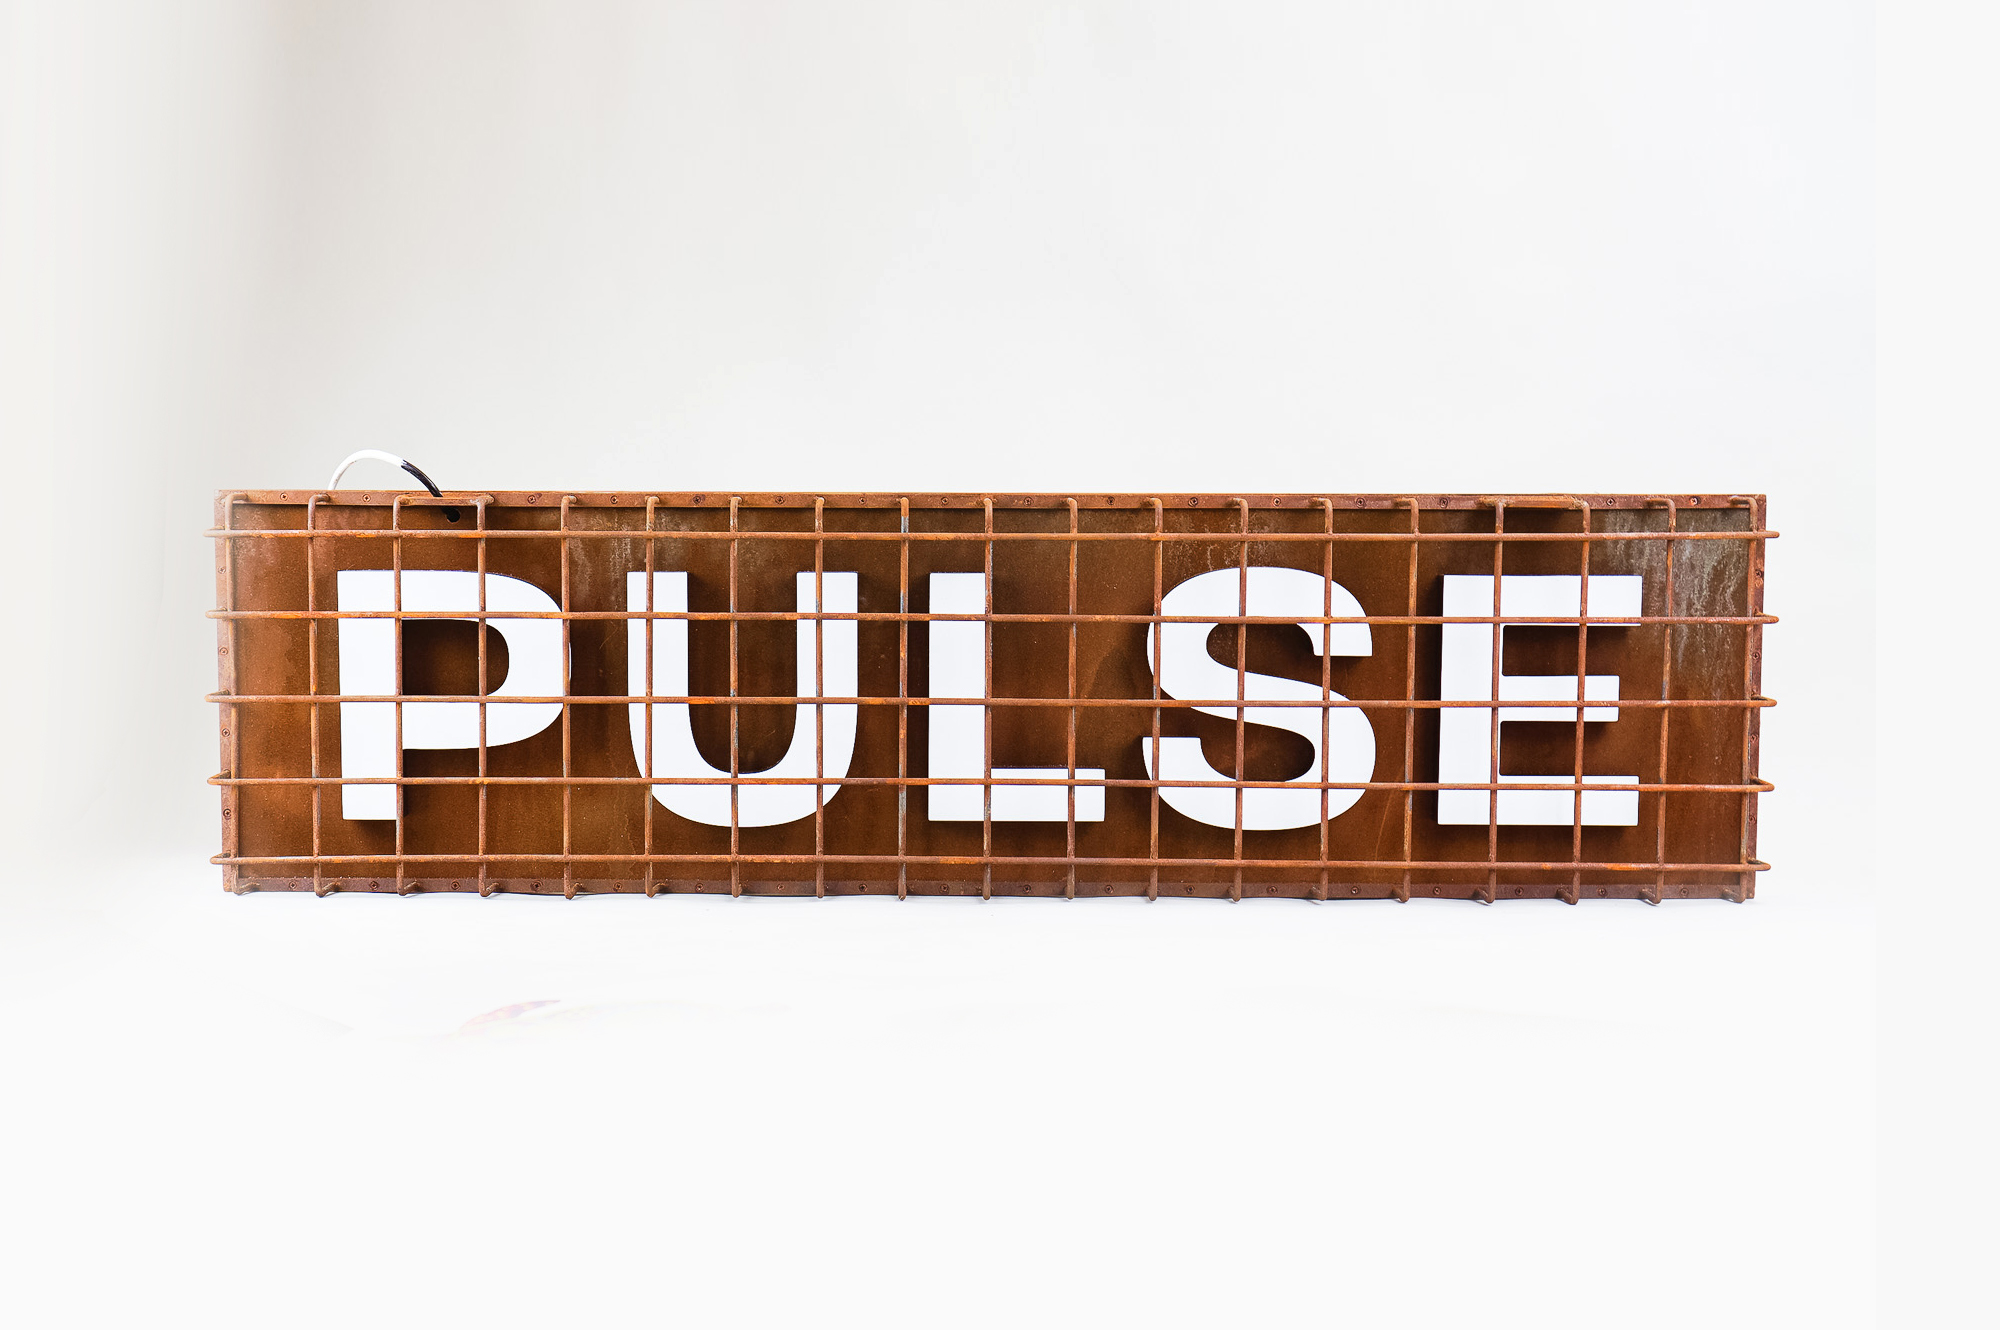 Industrial, caged, rusty metal illuminated sign for Pulse, a fitness studio at Newtown Athletic Club, a premiere family fitness and wellness center serving residents of Newtown, PA